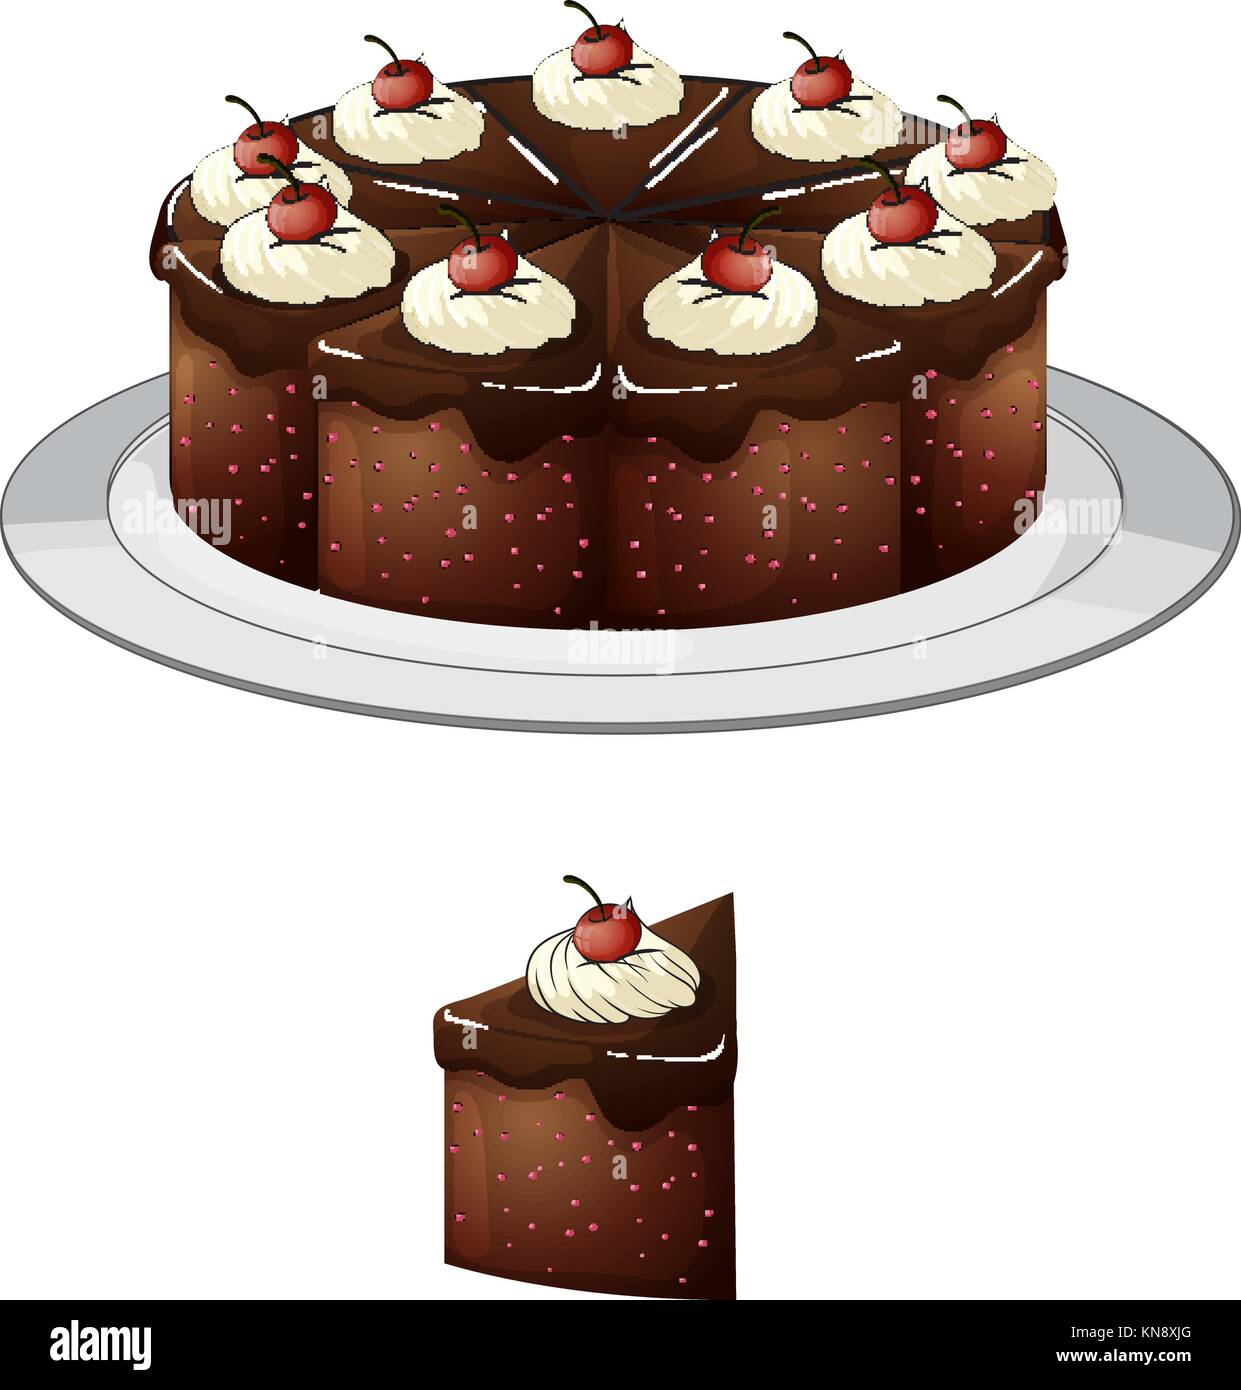 Illustration of a chocolate cake and a slice with cherries on top on a white background Stock Vector